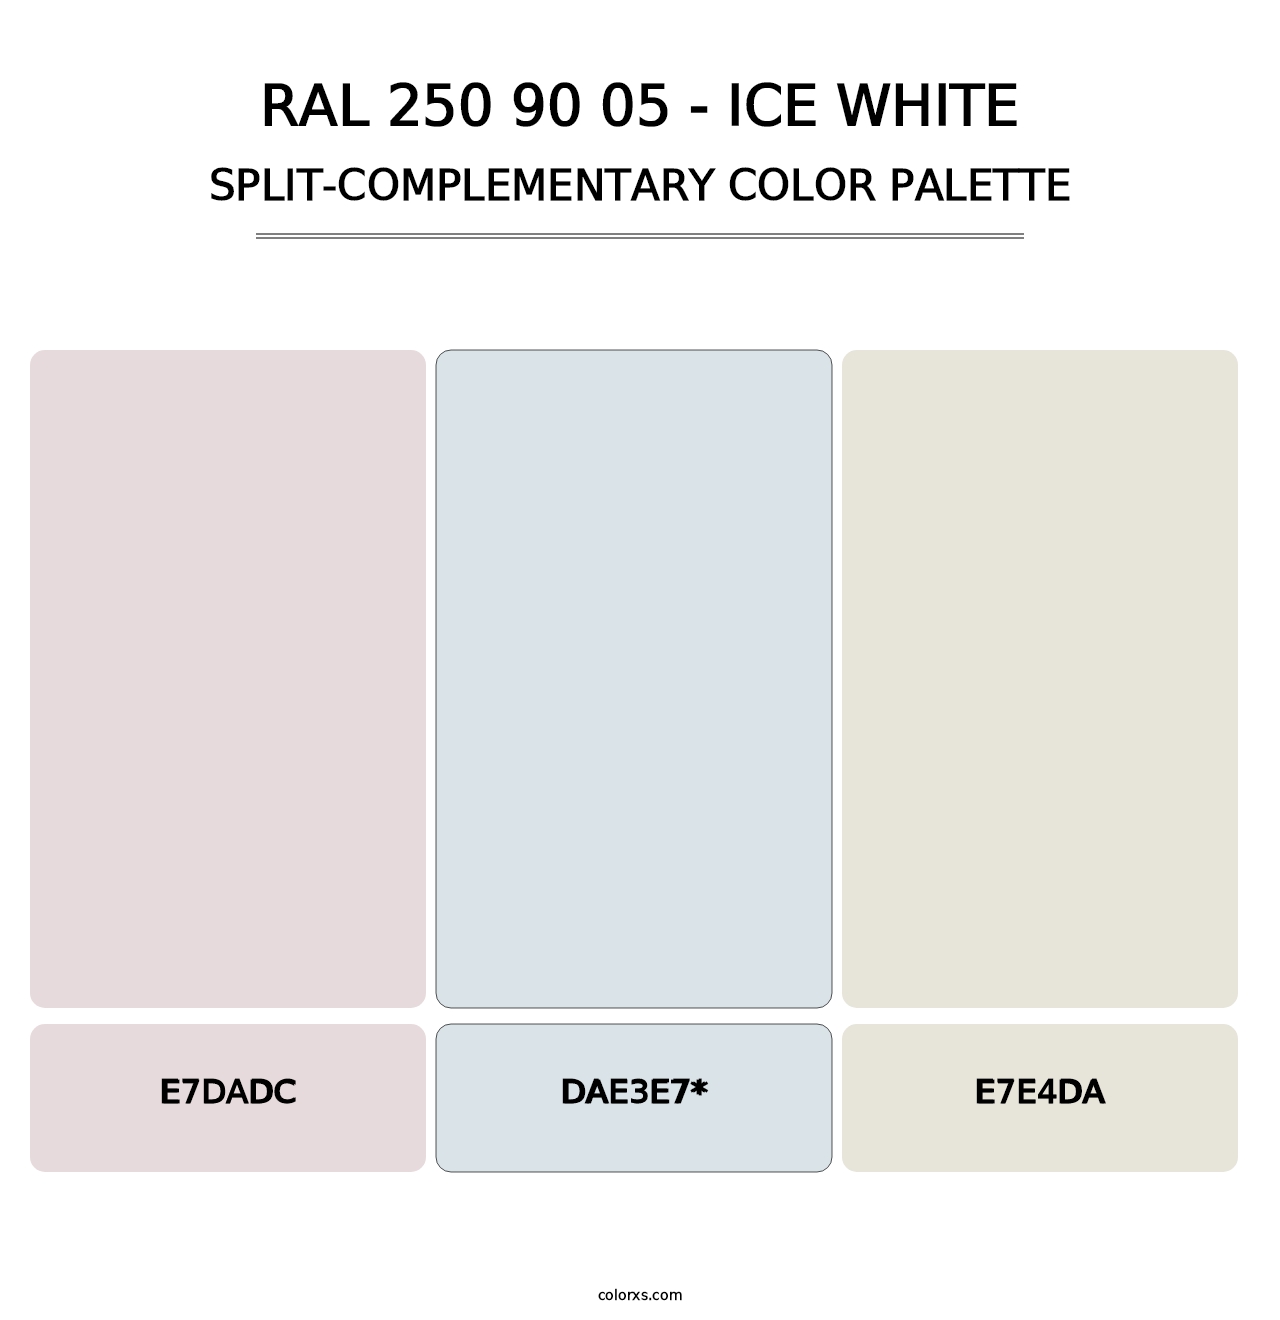 RAL 250 90 05 - Ice White - Split-Complementary Color Palette